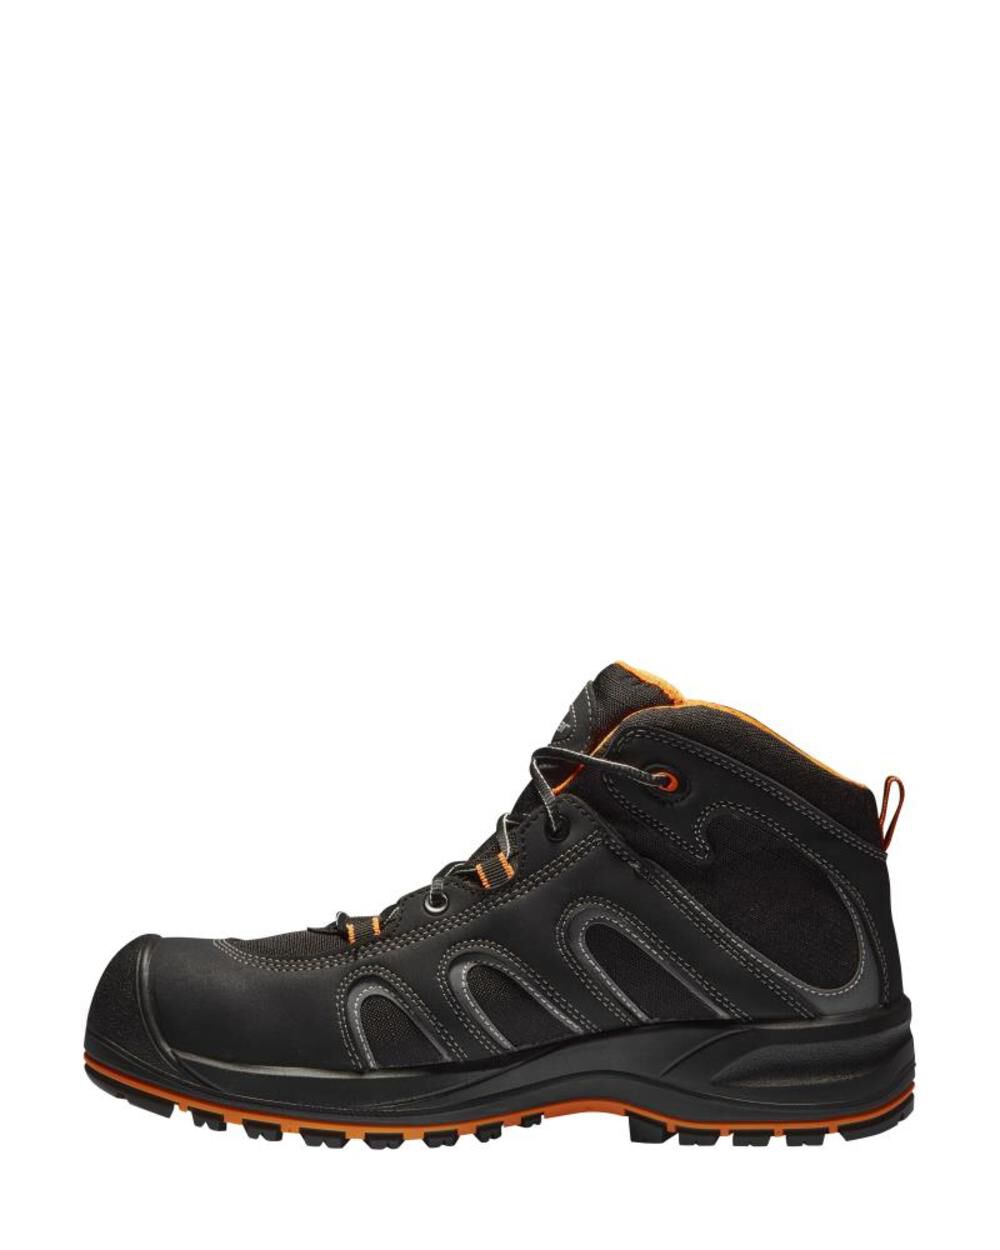 Gear Safety Shoes Falcon Size 11 SGUS73002110